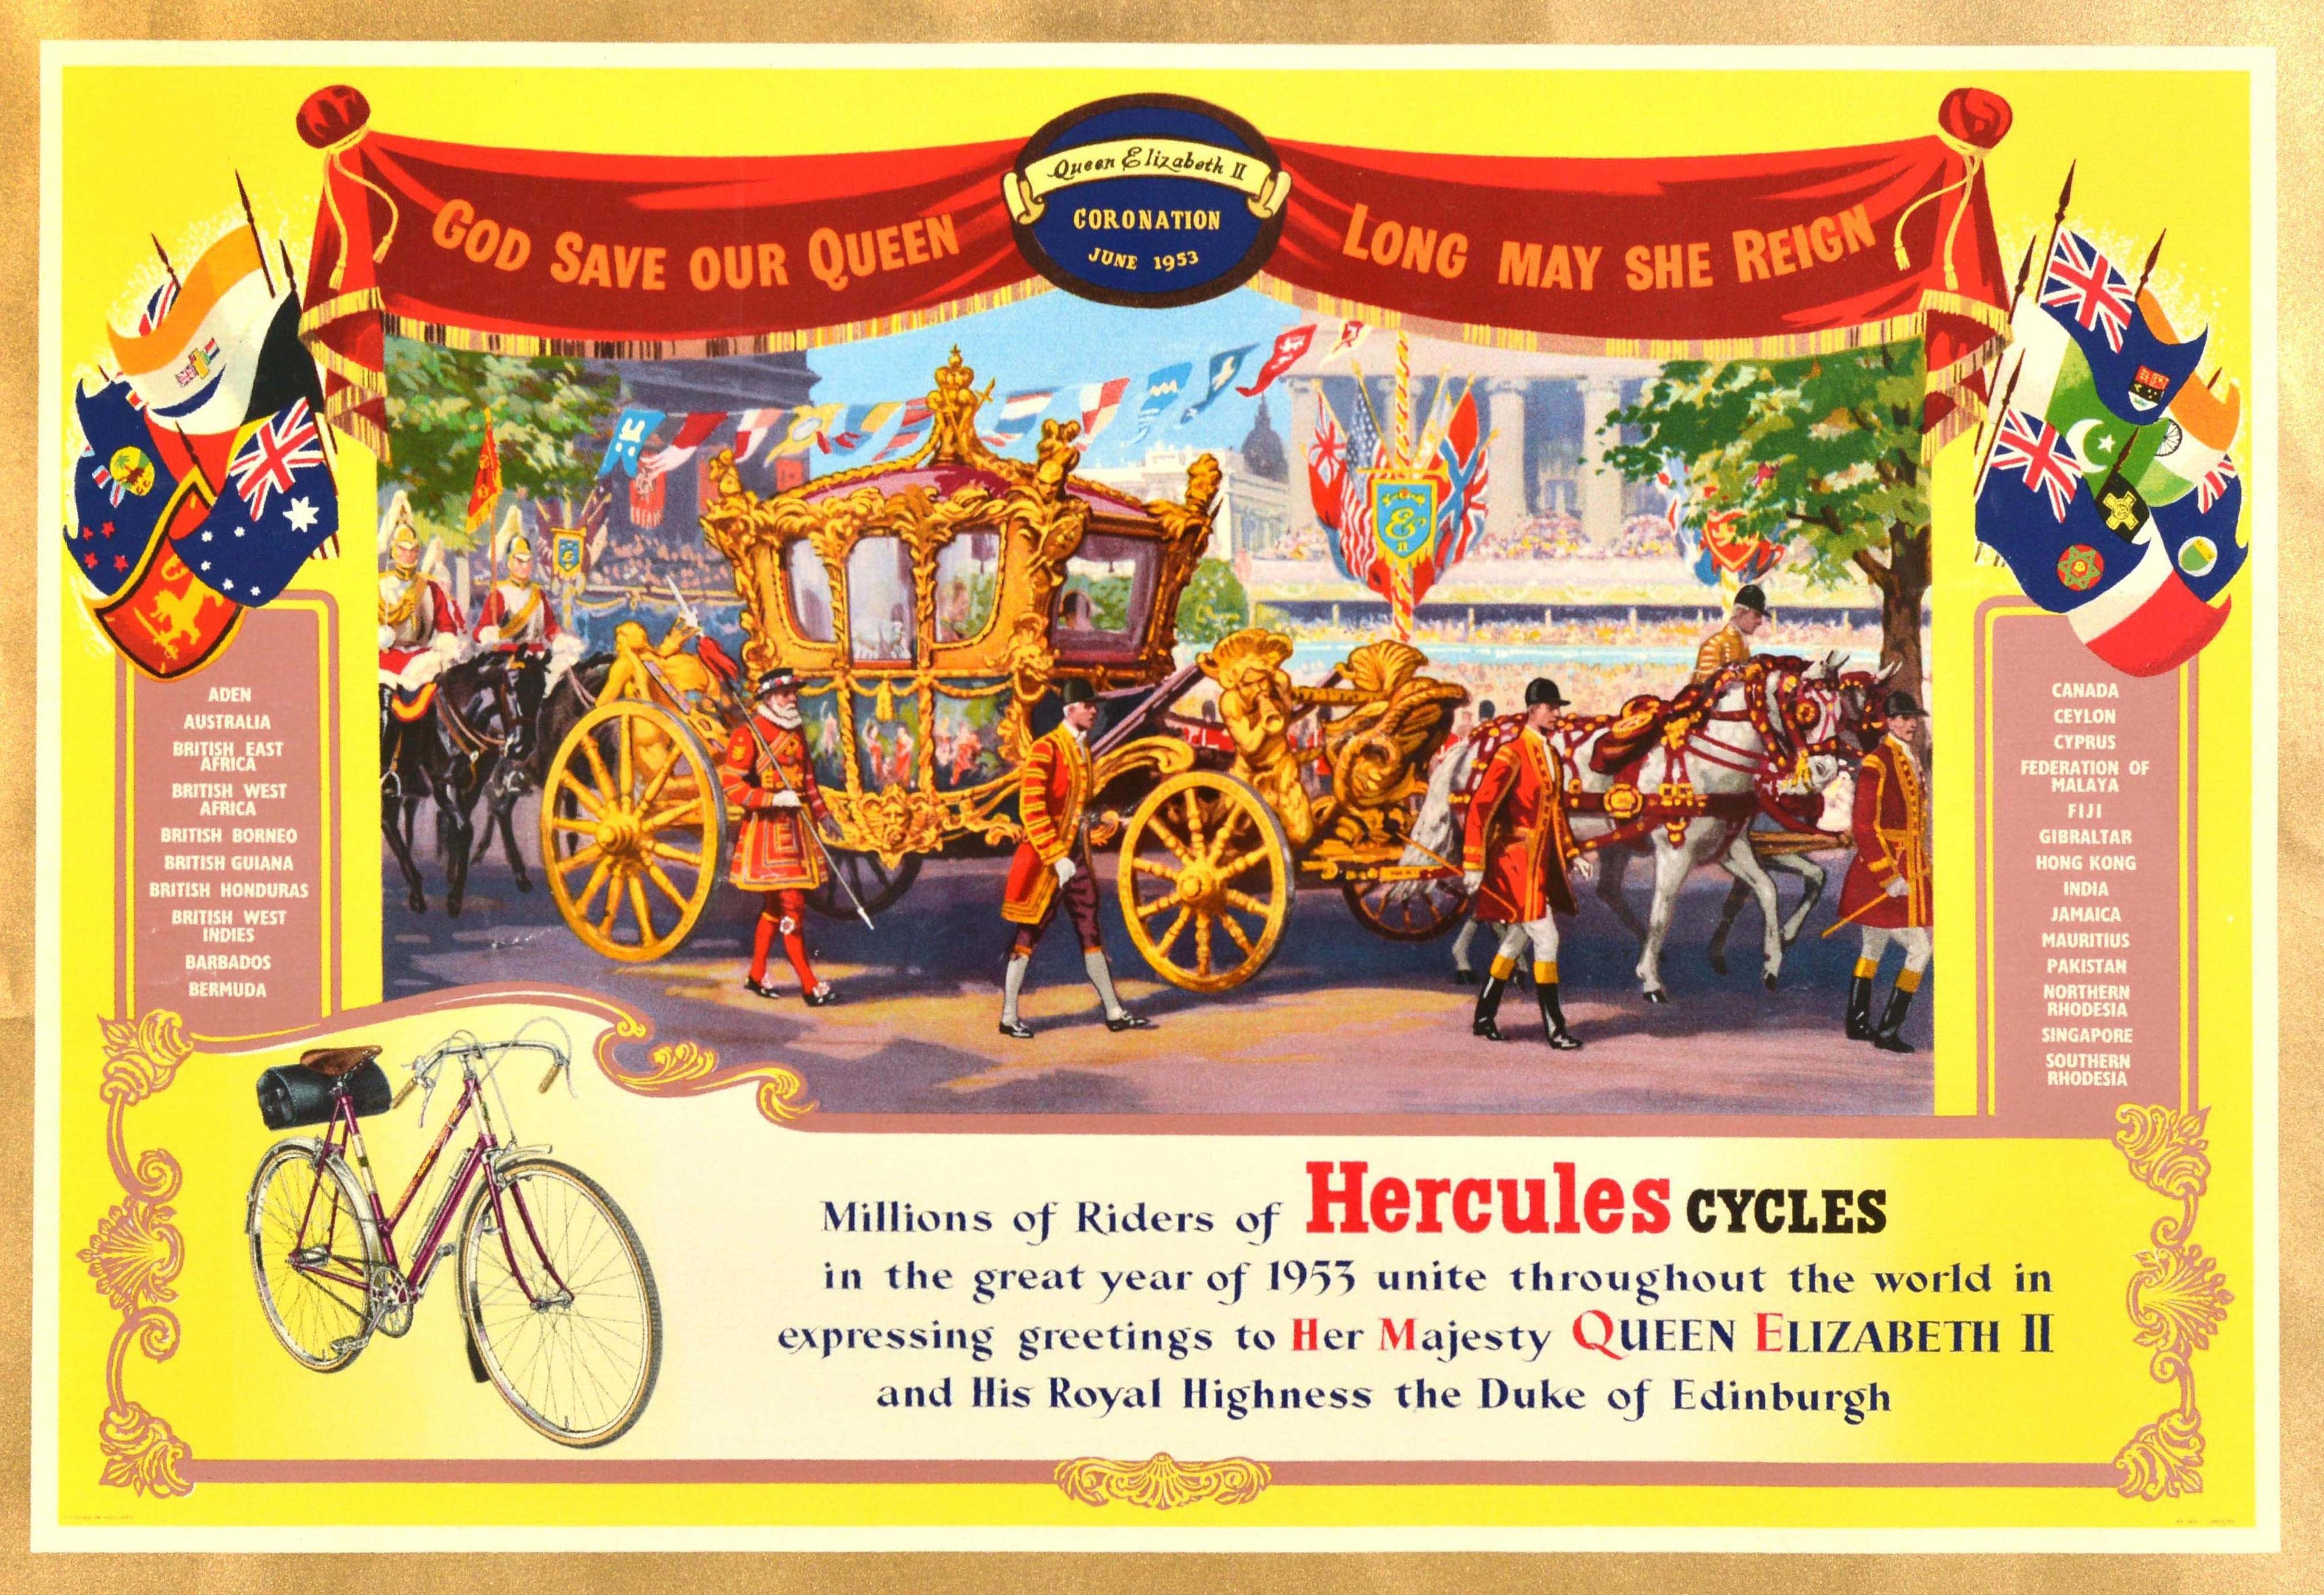 Original vintage bicycle advertising poster issued by Hercules Cycles for the Queen's coronation featuring a colourful illustration of the Royal procession with the horse drawn Gold State Coach being led by Beefeaters and Royal guards in front of